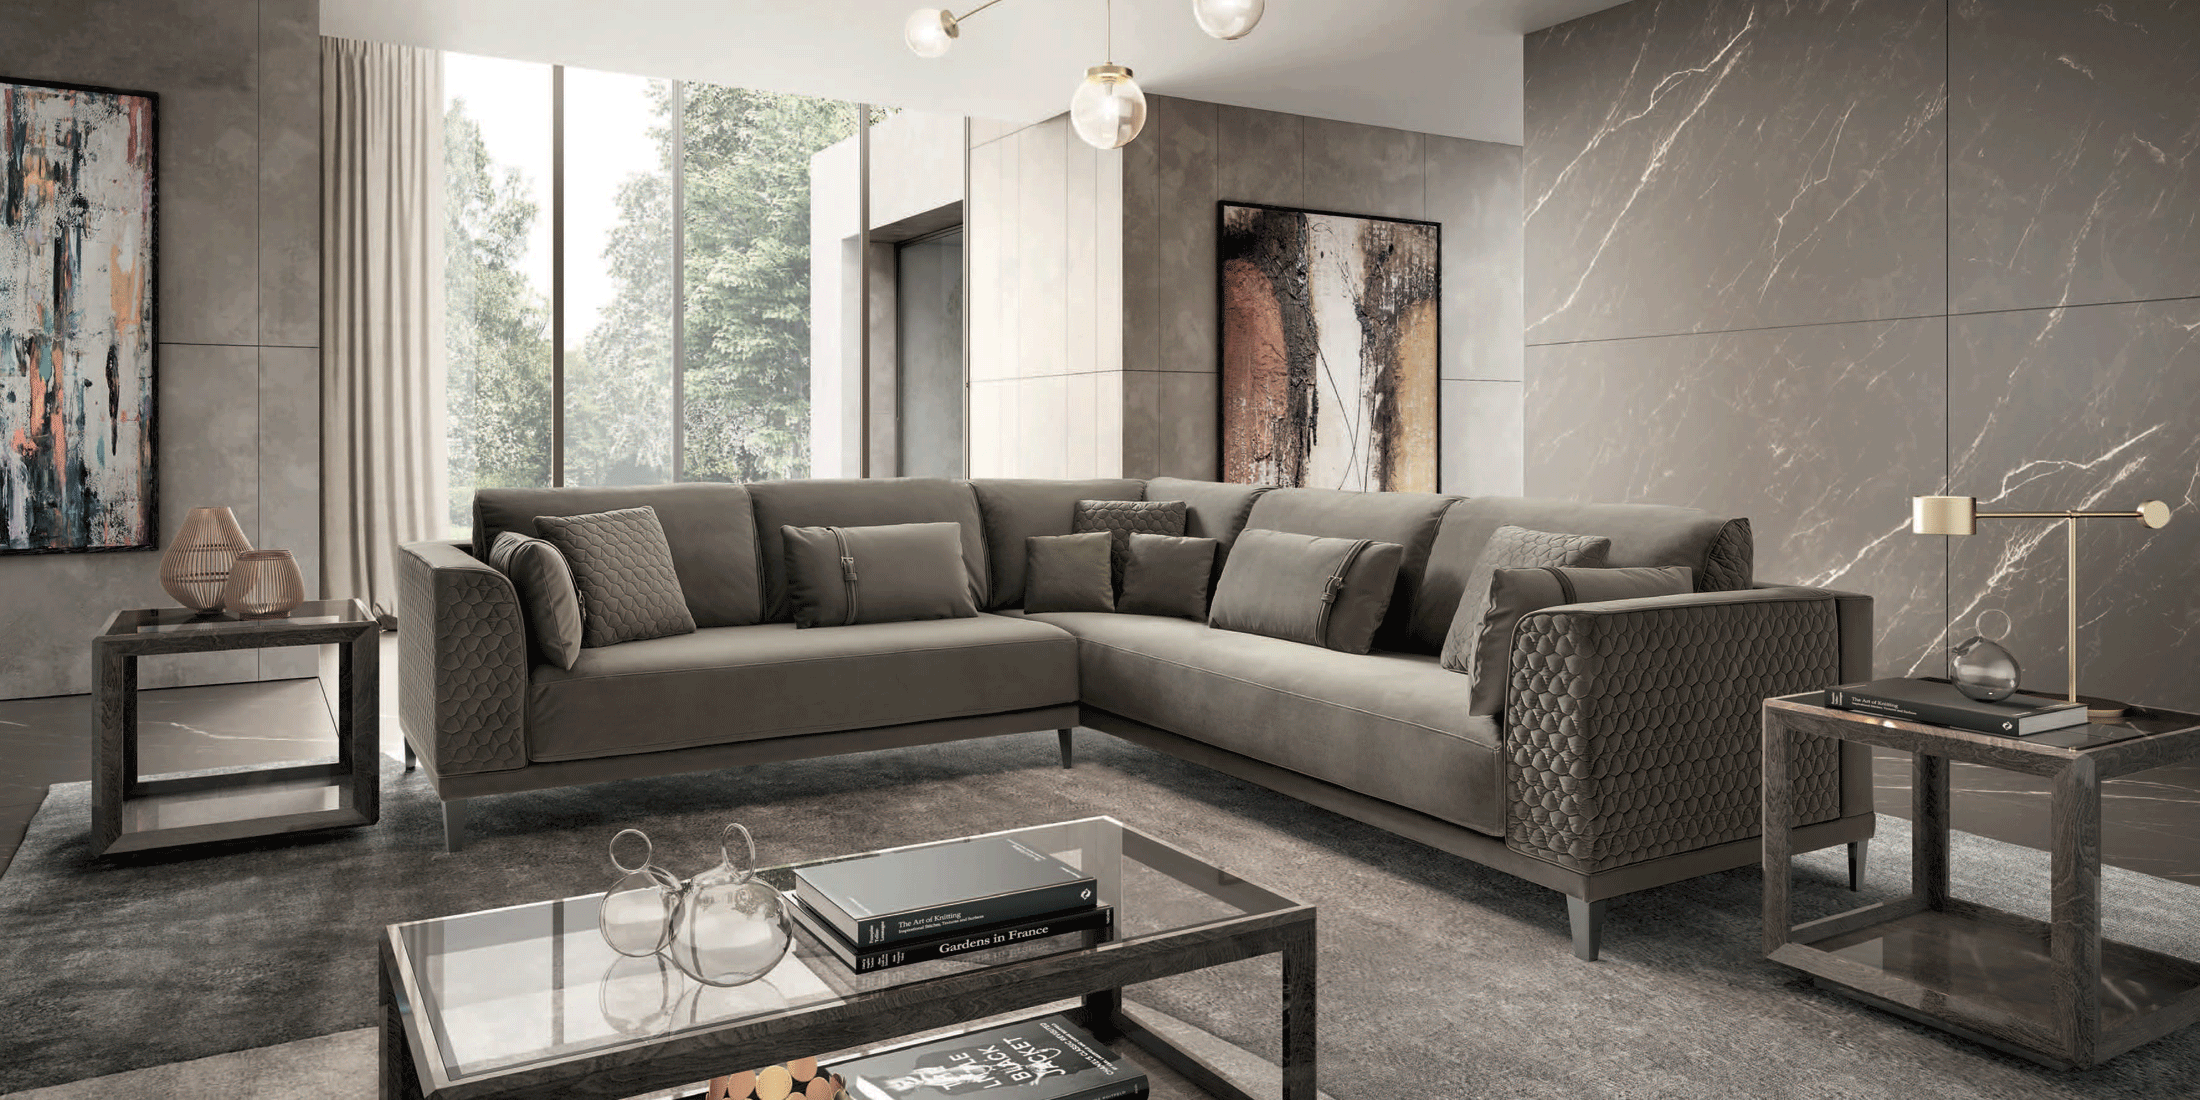 Living Room Furniture Sofas Loveseats and Chairs Mood Sectional